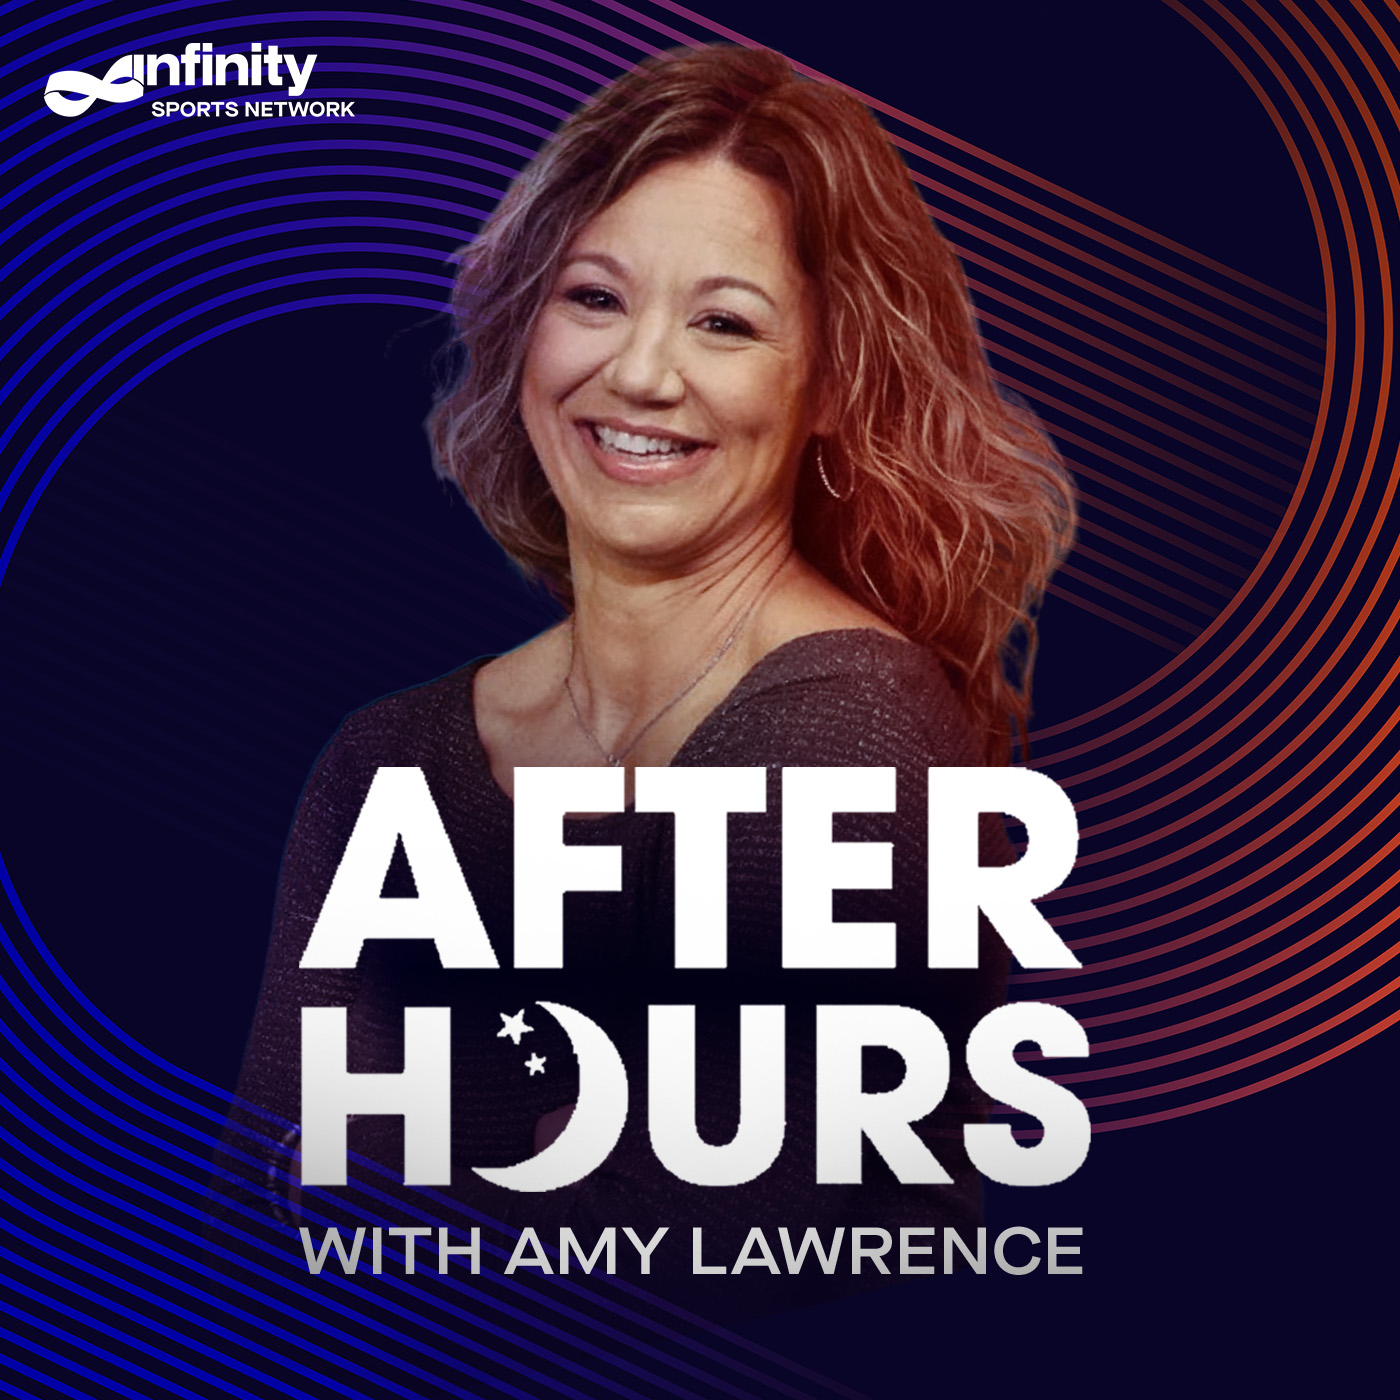 12-28-21 After Hours with Amy Lawrence PODCAST: Hour 4